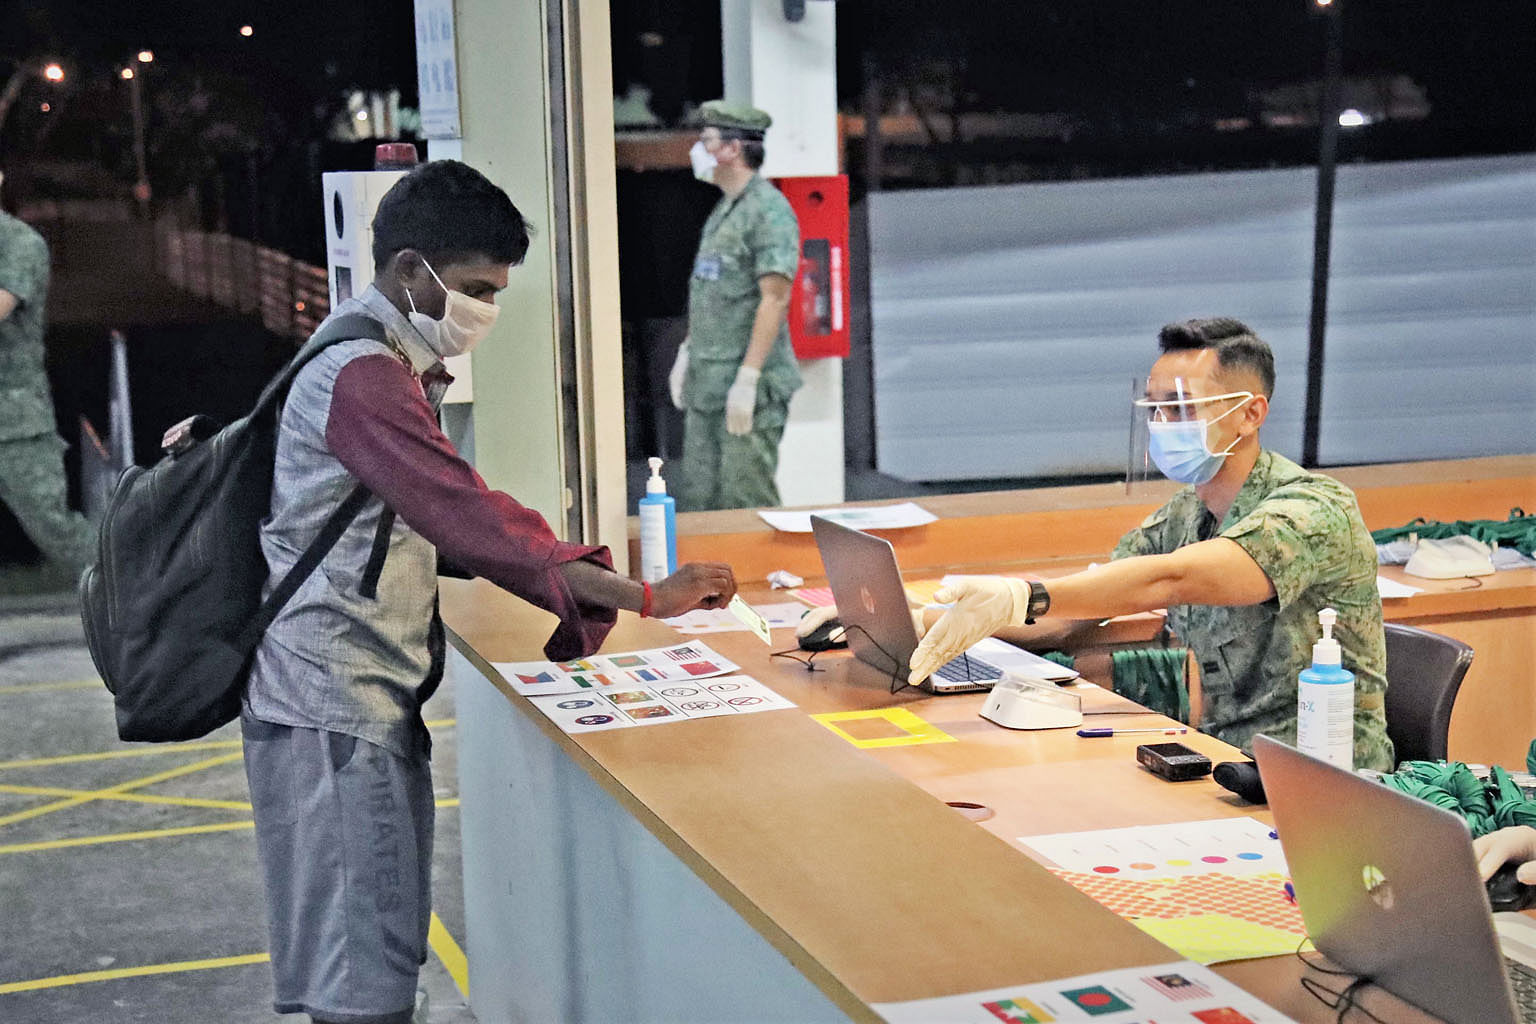 Sarimbun Scout Camp in Lim Chu Kang, one of the premises being used to house foreign workers. Marquees at Tanjong Pagar Terminal on Wednesday. A large facility is being set up that could house up to 15,000 Covid-19 patients or foreign workers, as the